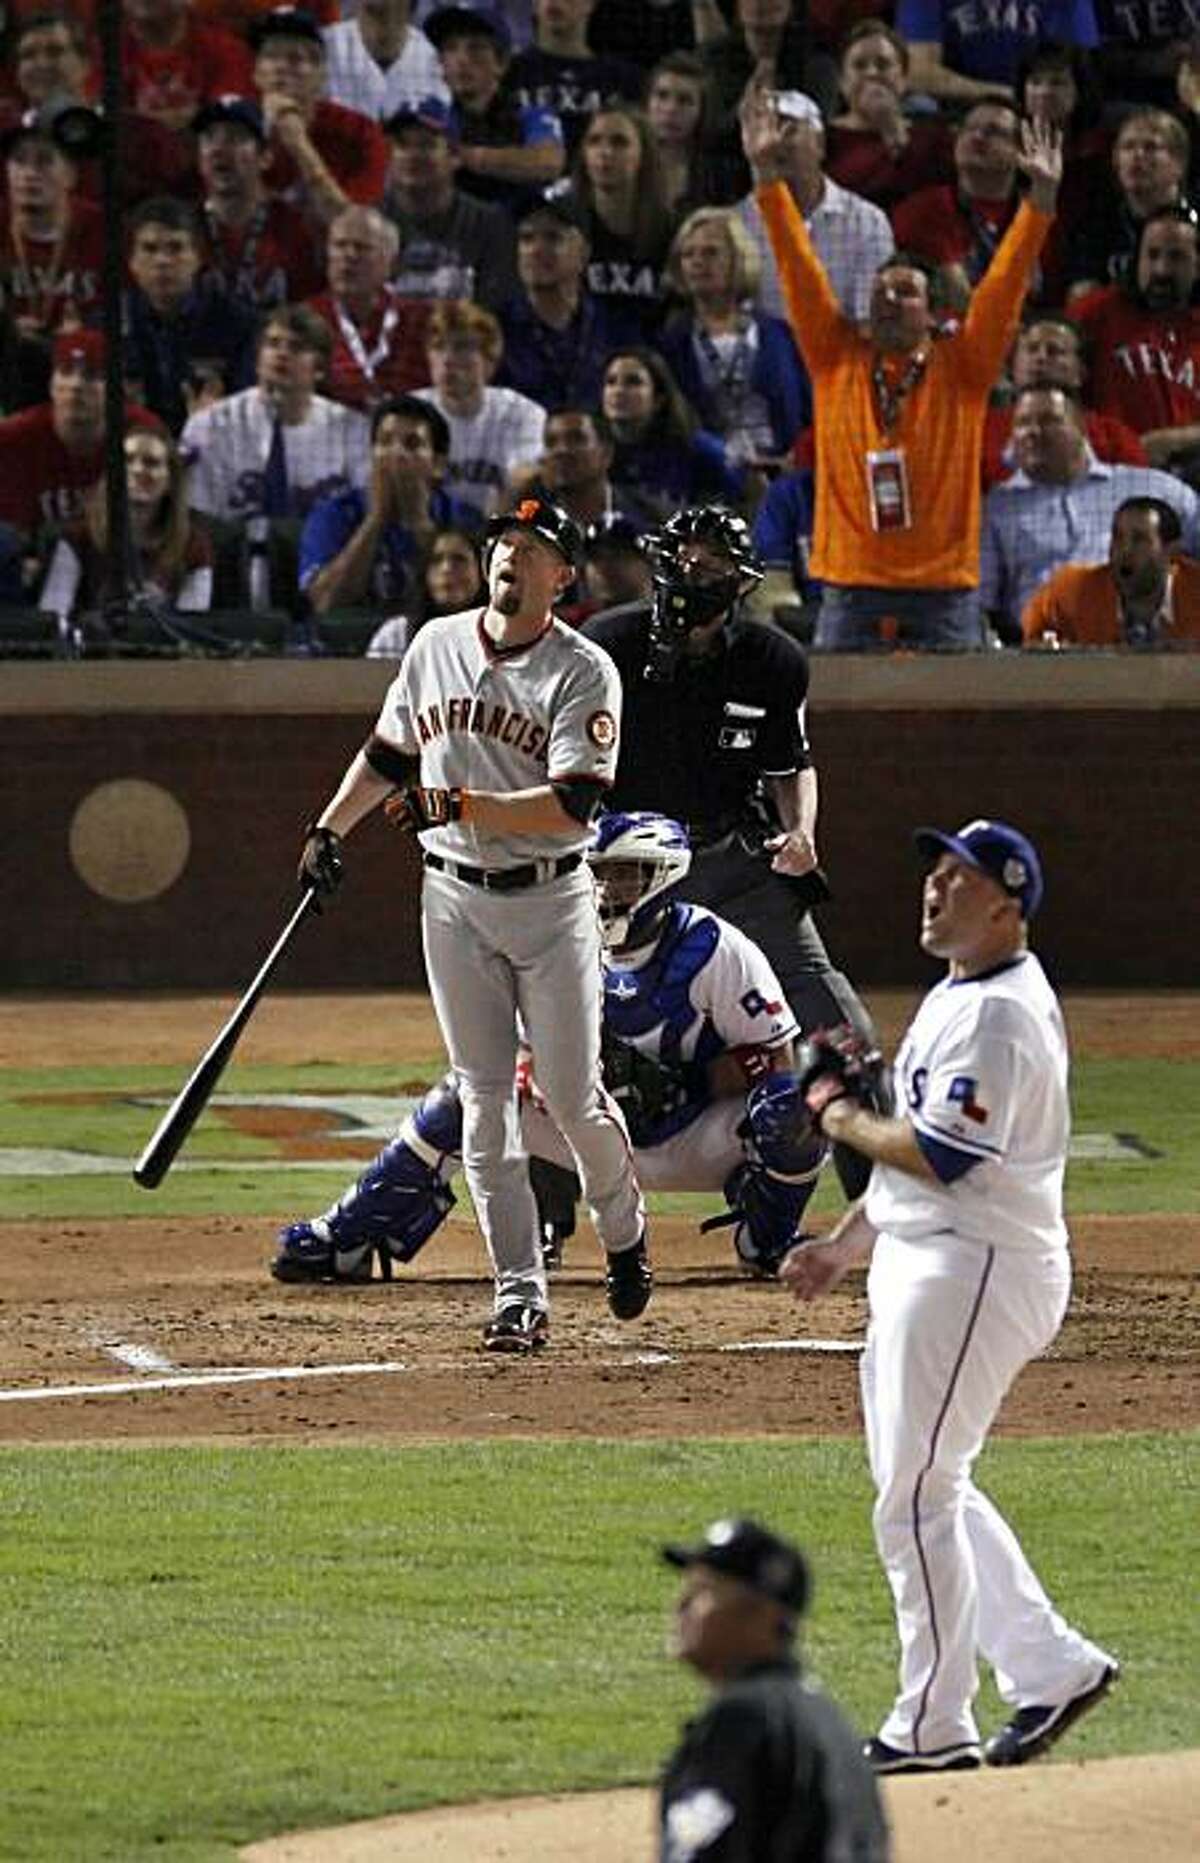 San Francisco Giants first baseman Aubrey Huff (17) watches his two run homer in the third inning during game 4 of the 2010 World Series between the San Francisco Giants and the Texas Rangers on Sunday, Oct. 31, 2010 in Arlington, Tx.San Francisco GiantsSan Francisco Giants first baseman Aubrey Huff (17) watches his two run homer in the third inning during game 4 of the 2010 World Series between the San Francisco Giants and the Texas Rangers on Sunday, Oct. 31, 2010 in Arlington, Tx. Ran on: 11-01-2010 Aubrey Huff and Rangers pitcher Tommy Hunter watch Huff's drive soar high and deep beyond the right-field wall for a two-run homer in the third inning. Ran on: 11-01-2010 Aubrey Huff and Rangers pitcher Tommy Hunter watch Huff's drive soar high and deep beyond the right-field wall for a two-run homer in the third inning. MANDATORY CREDIT FOR PHOTOG AND SAN FRANCISCO CHRONICLE/NO SALES-MAGS OUT-INTERNET OUT-TV OUT